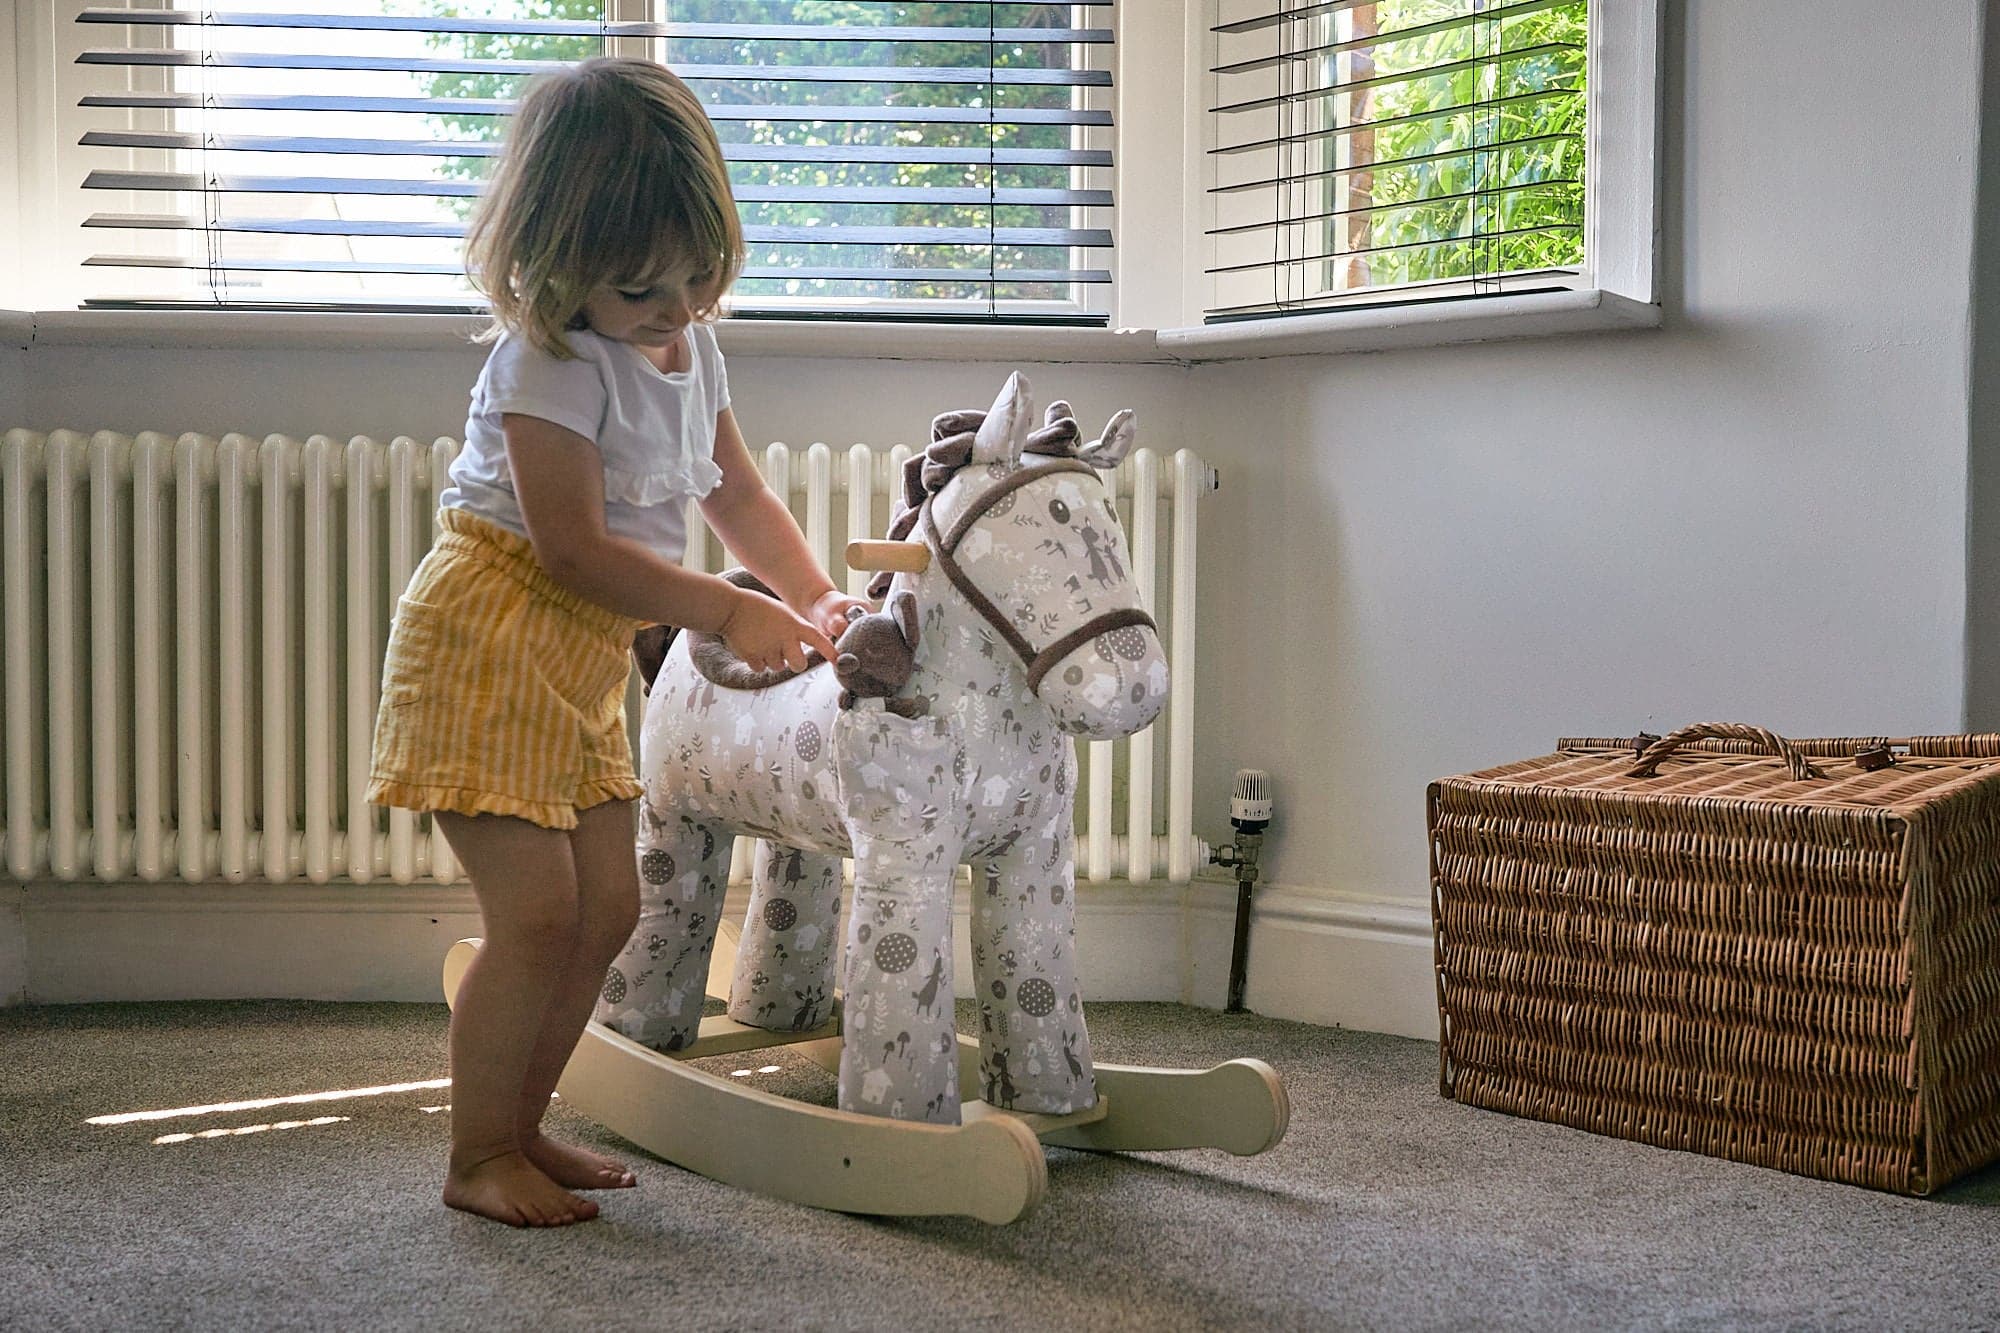 Little Bird Told Me Biscuit & Skip Rocking Horse (12m+) - For Your Little One